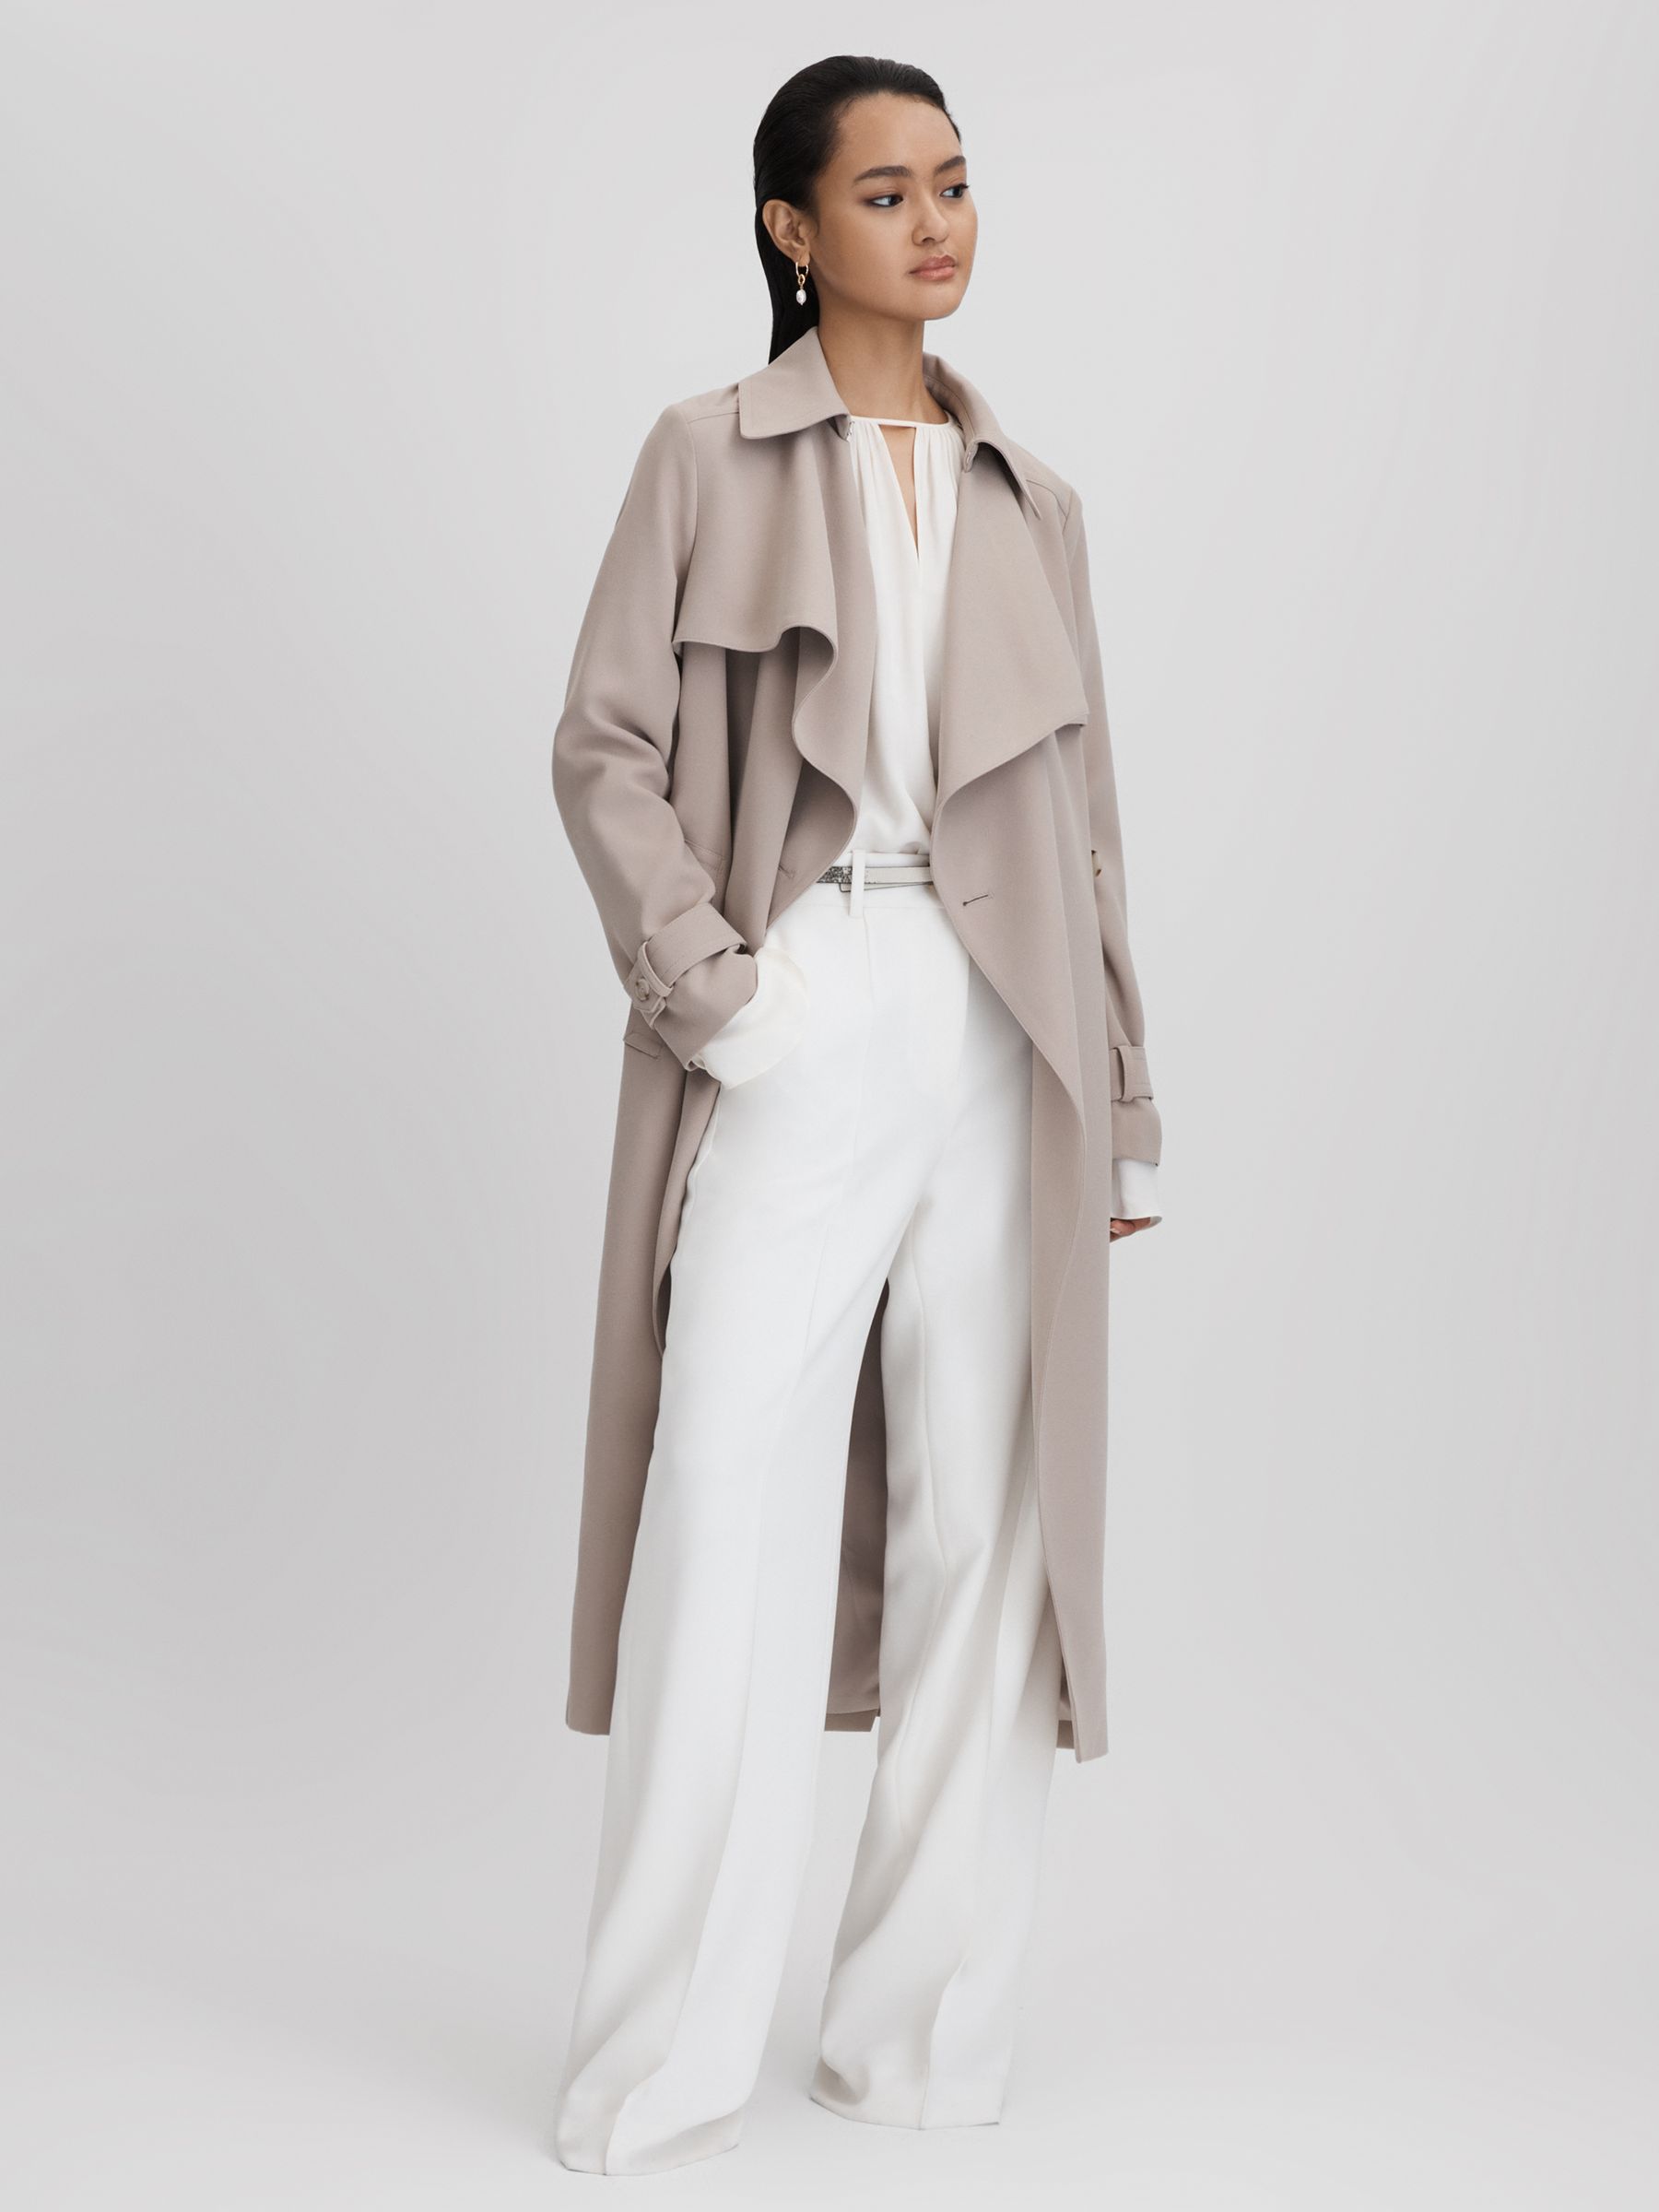 A poised model displays the Reiss Etta Double Breasted Trench in Mink Neutral, a garment that exudes effortless sophistication. The coat's soft hue complements the crisp white outfit underneath, creating a serene and polished look. The trench's fluid drape and the model's elegant stance suggest both comfort and timeless style.